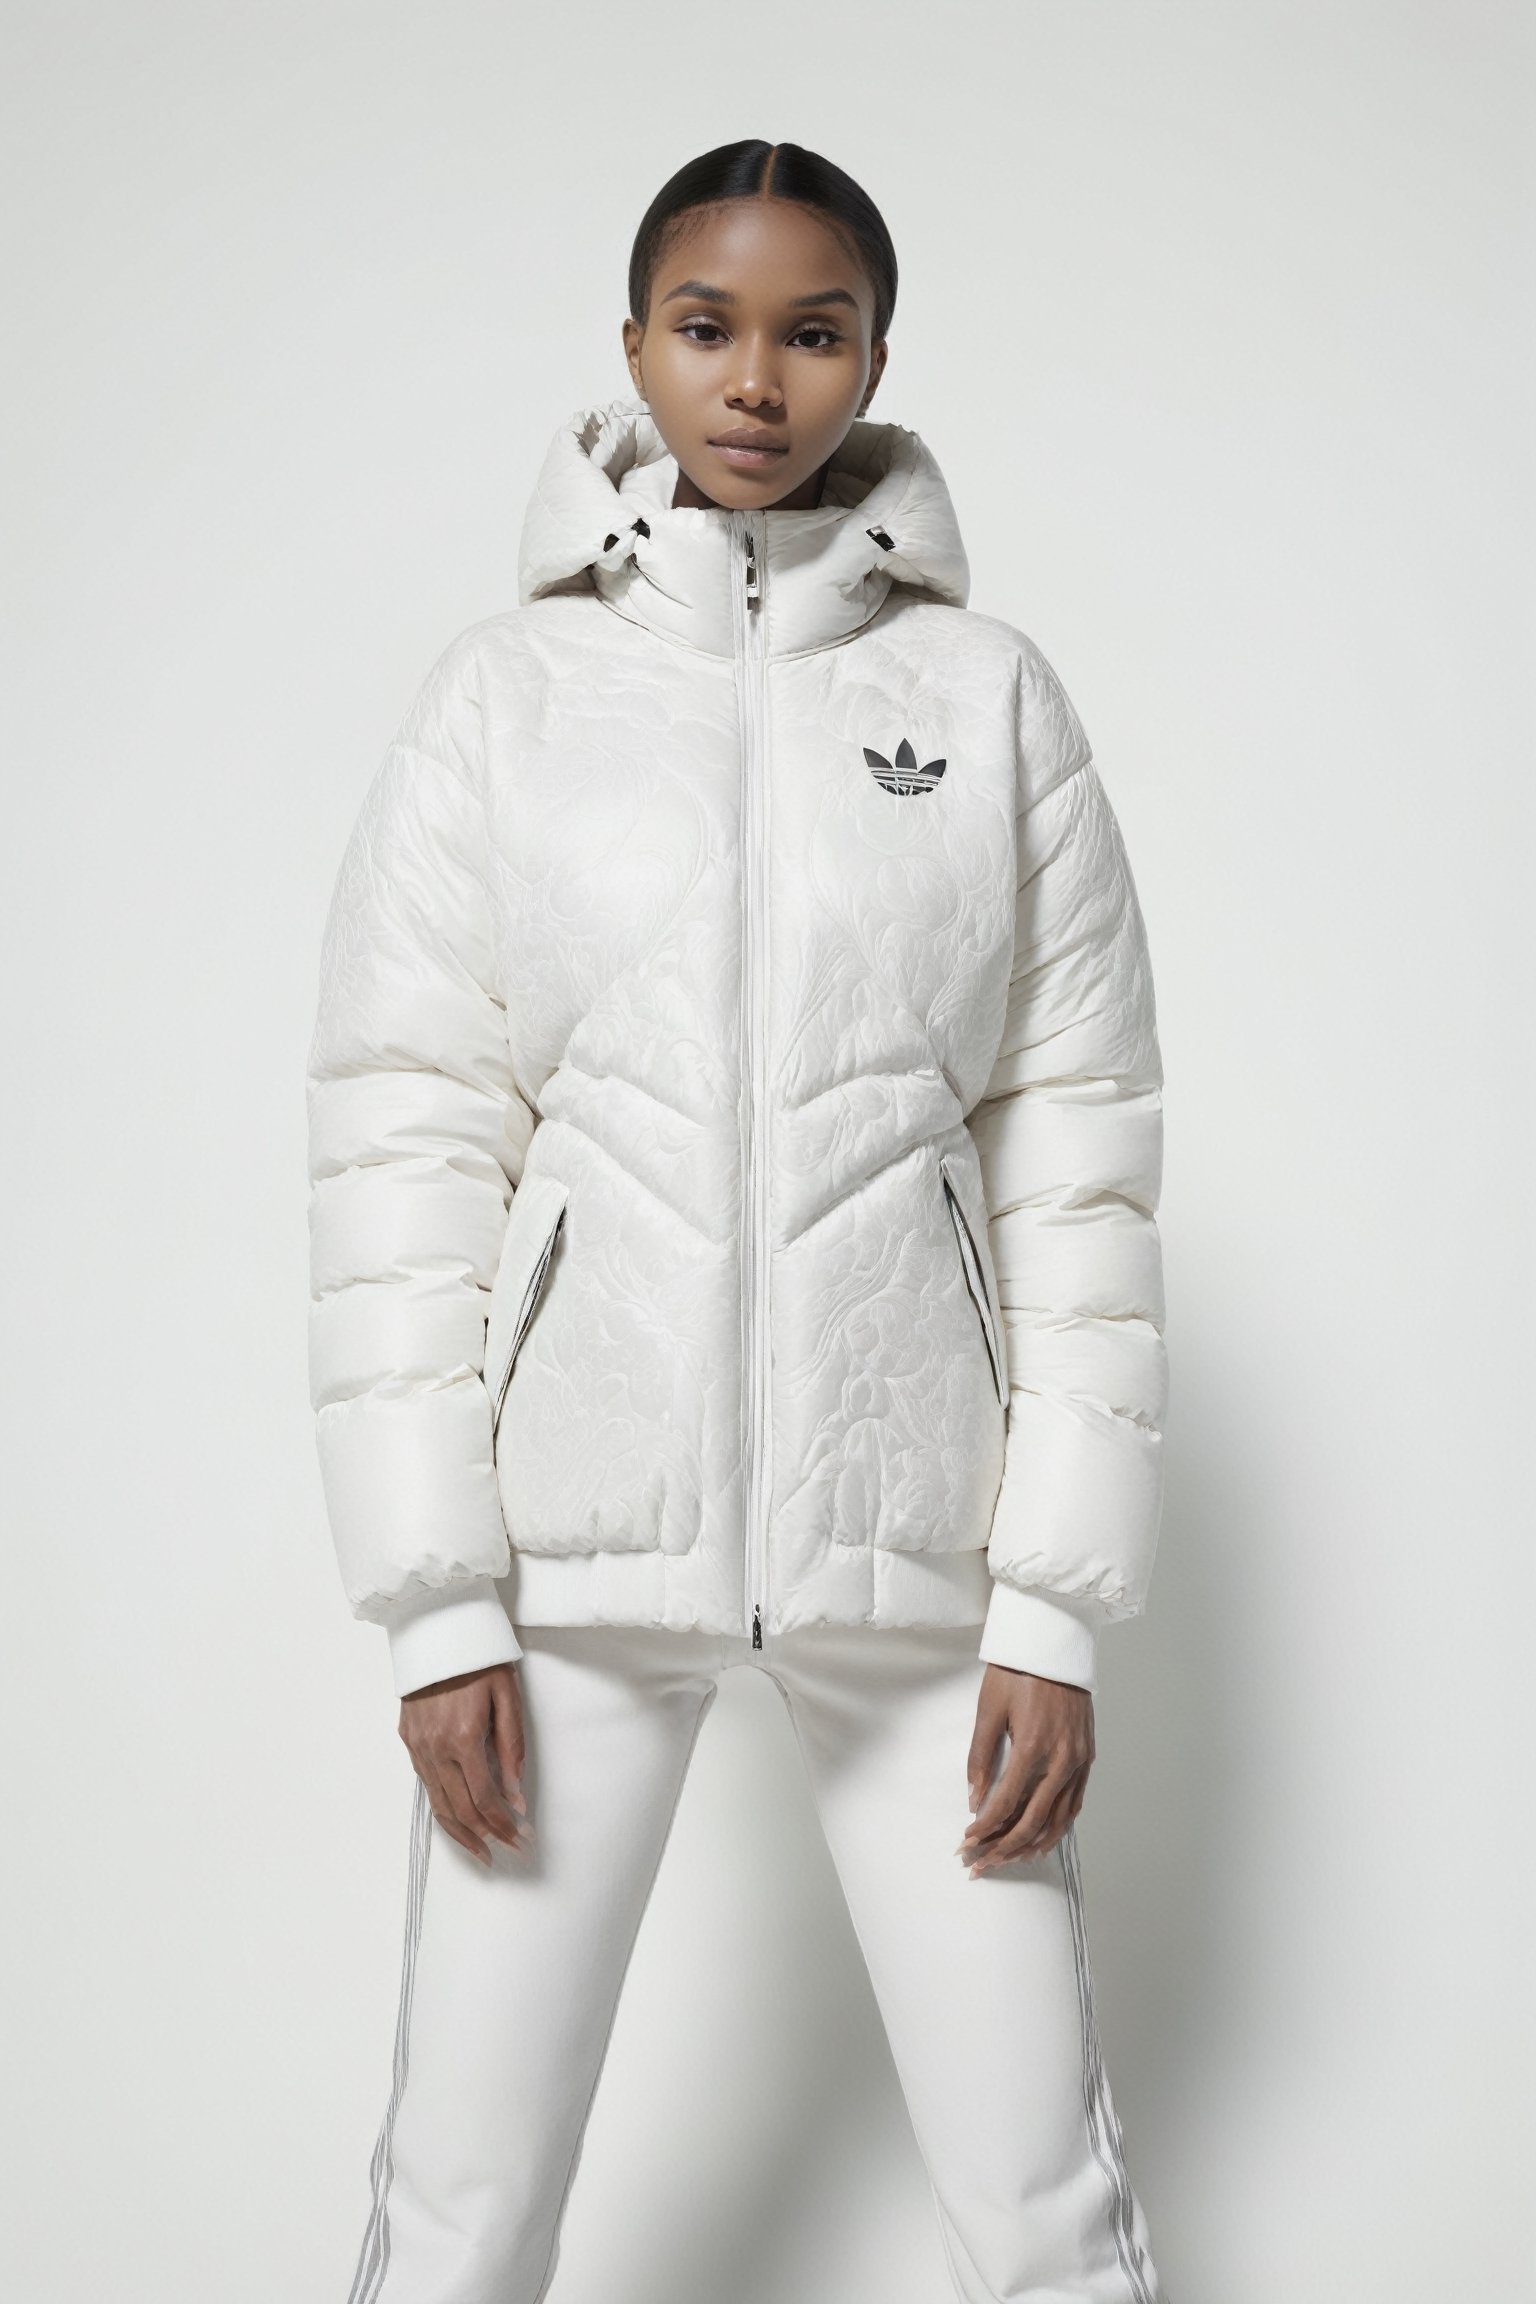 beautifull afro 26 y. o WOMAN, model, white hair in milky adidas winter puffer jacket, design trend, design by kanye west, on a white background, octane, 4K, intricate and detailed texture,